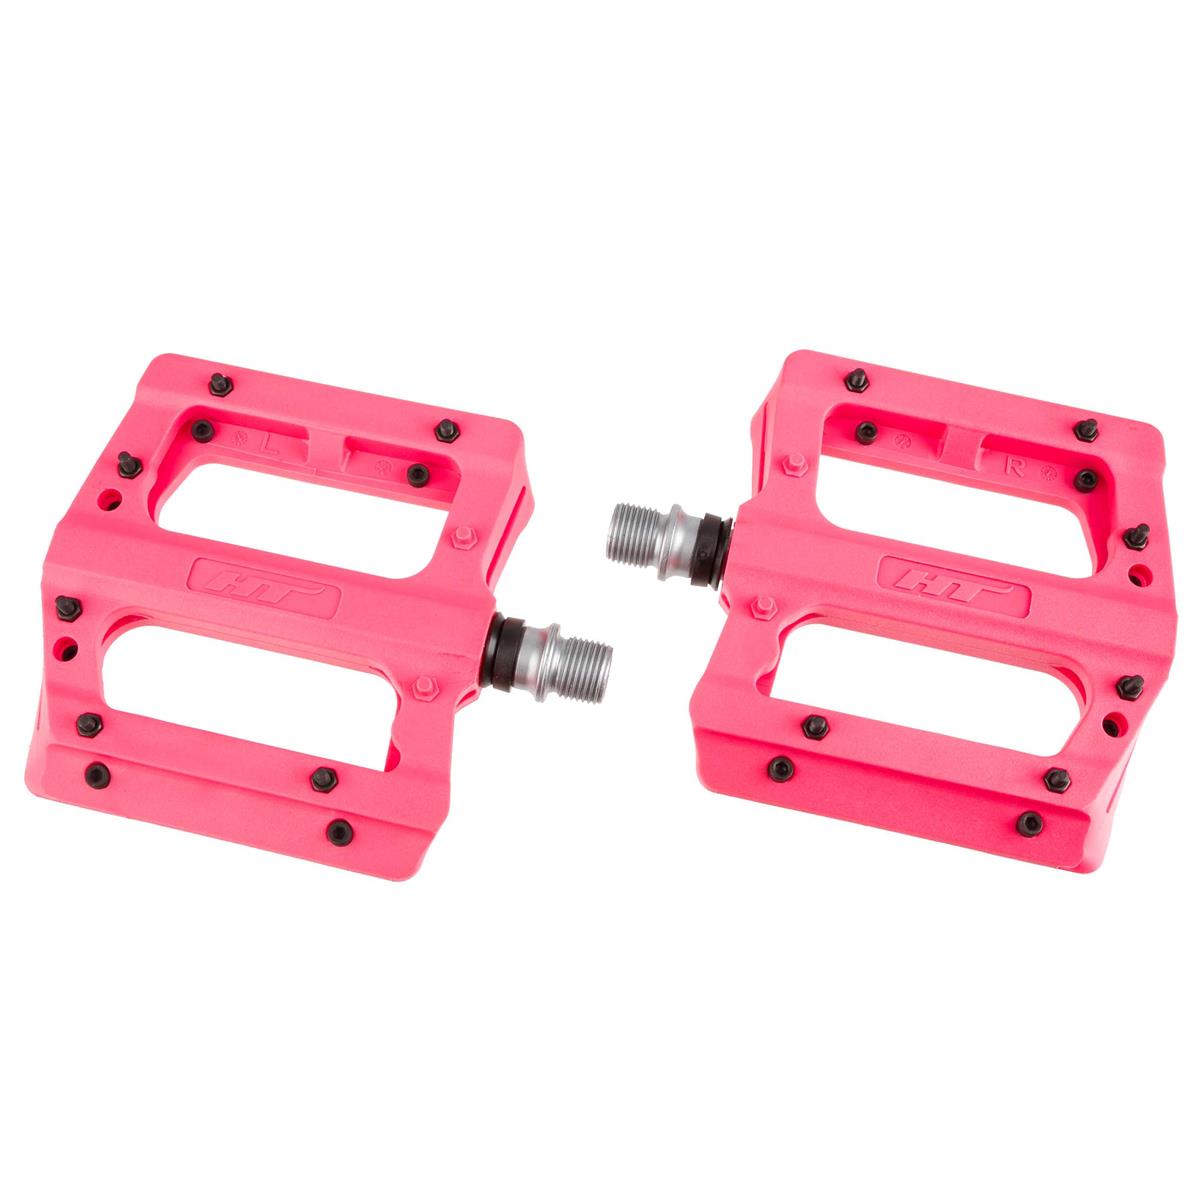 HT Components Pedali PA12A Rosa Fluo